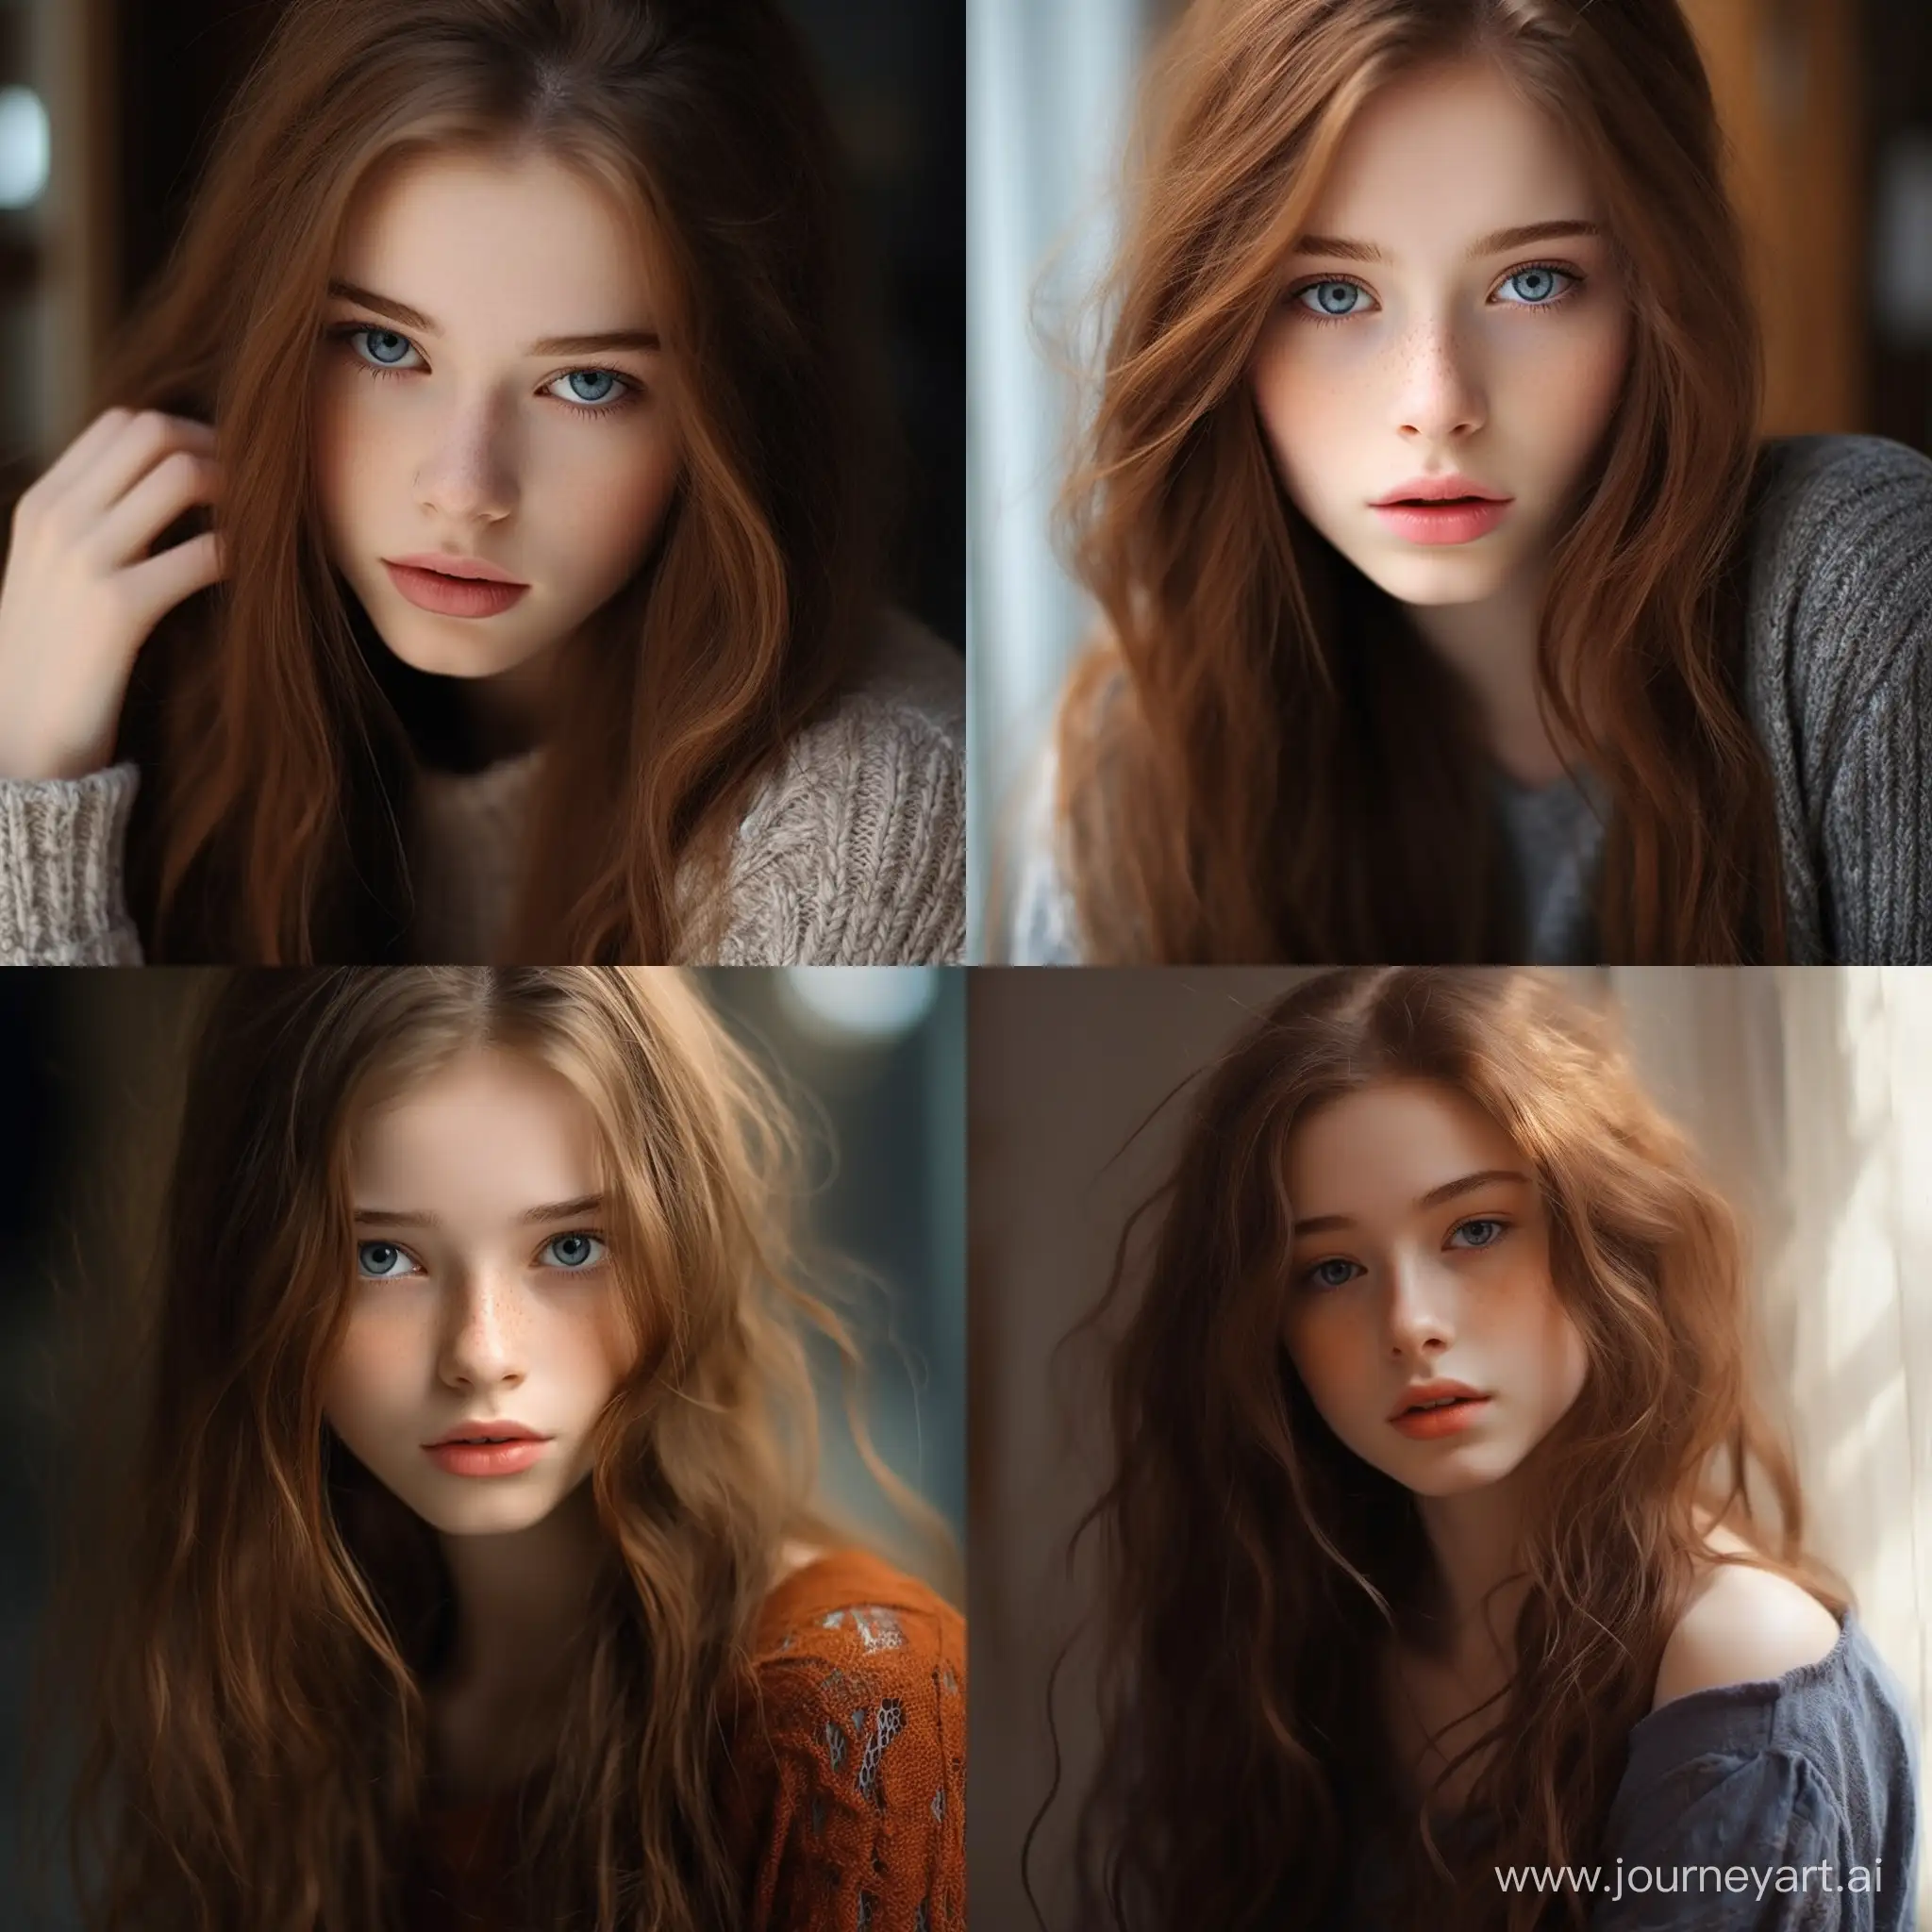 A beautiful, blue-eyed, brown-haired woman with pale skin and piercing eyes. Her appearance gives the impression of mystery and attractiveness., 15-17 years old